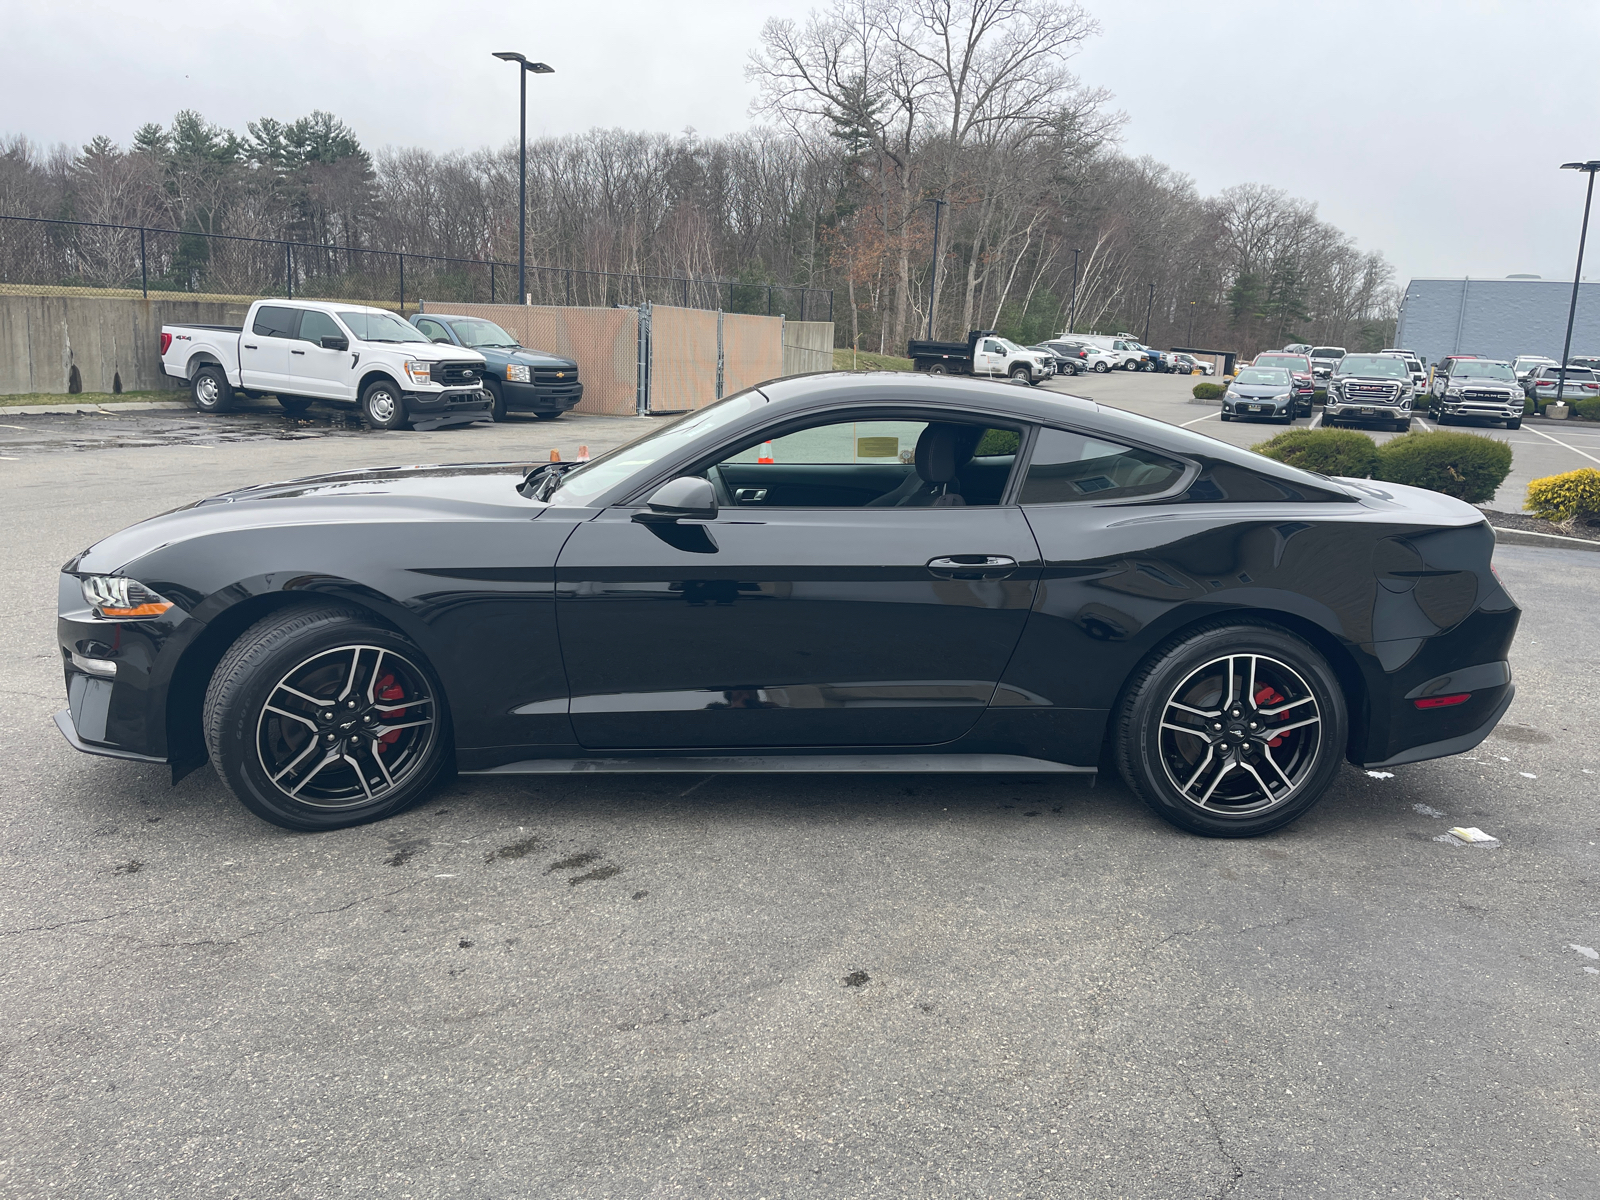 2019 Ford Mustang EcoBoost 5